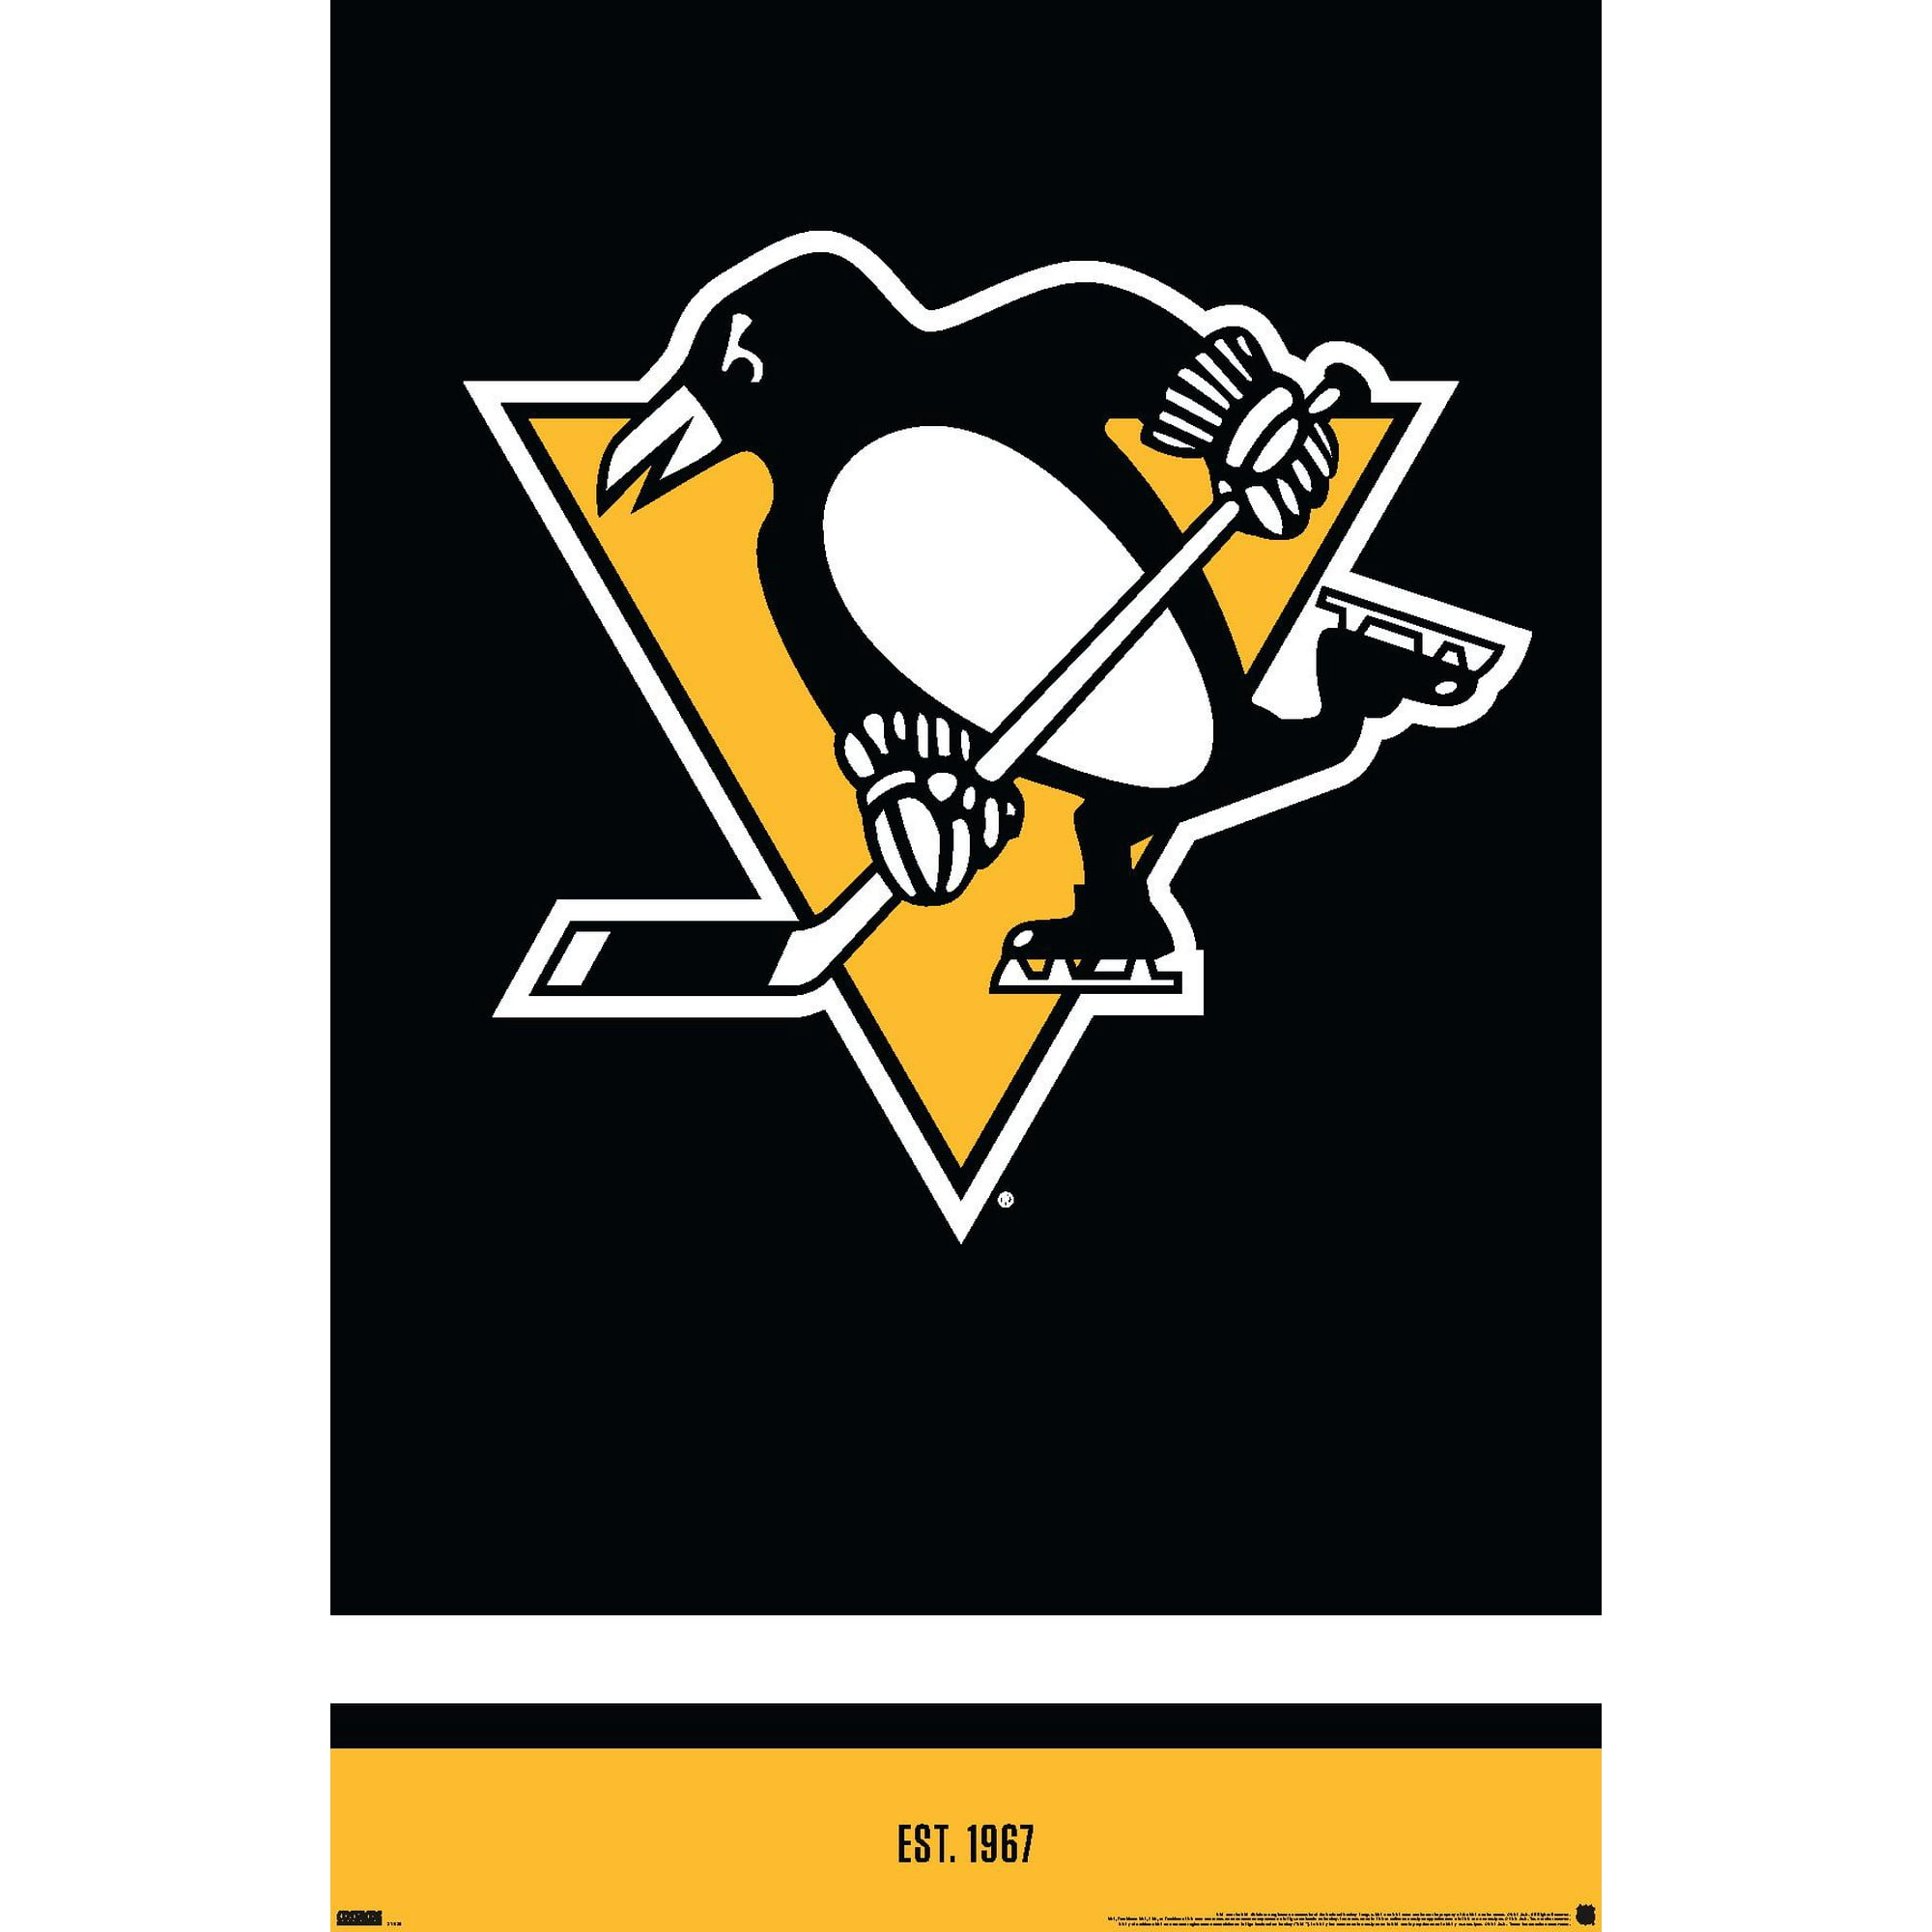 Pittsburgh Penguins Gift Cards & Penguins Gift Cards